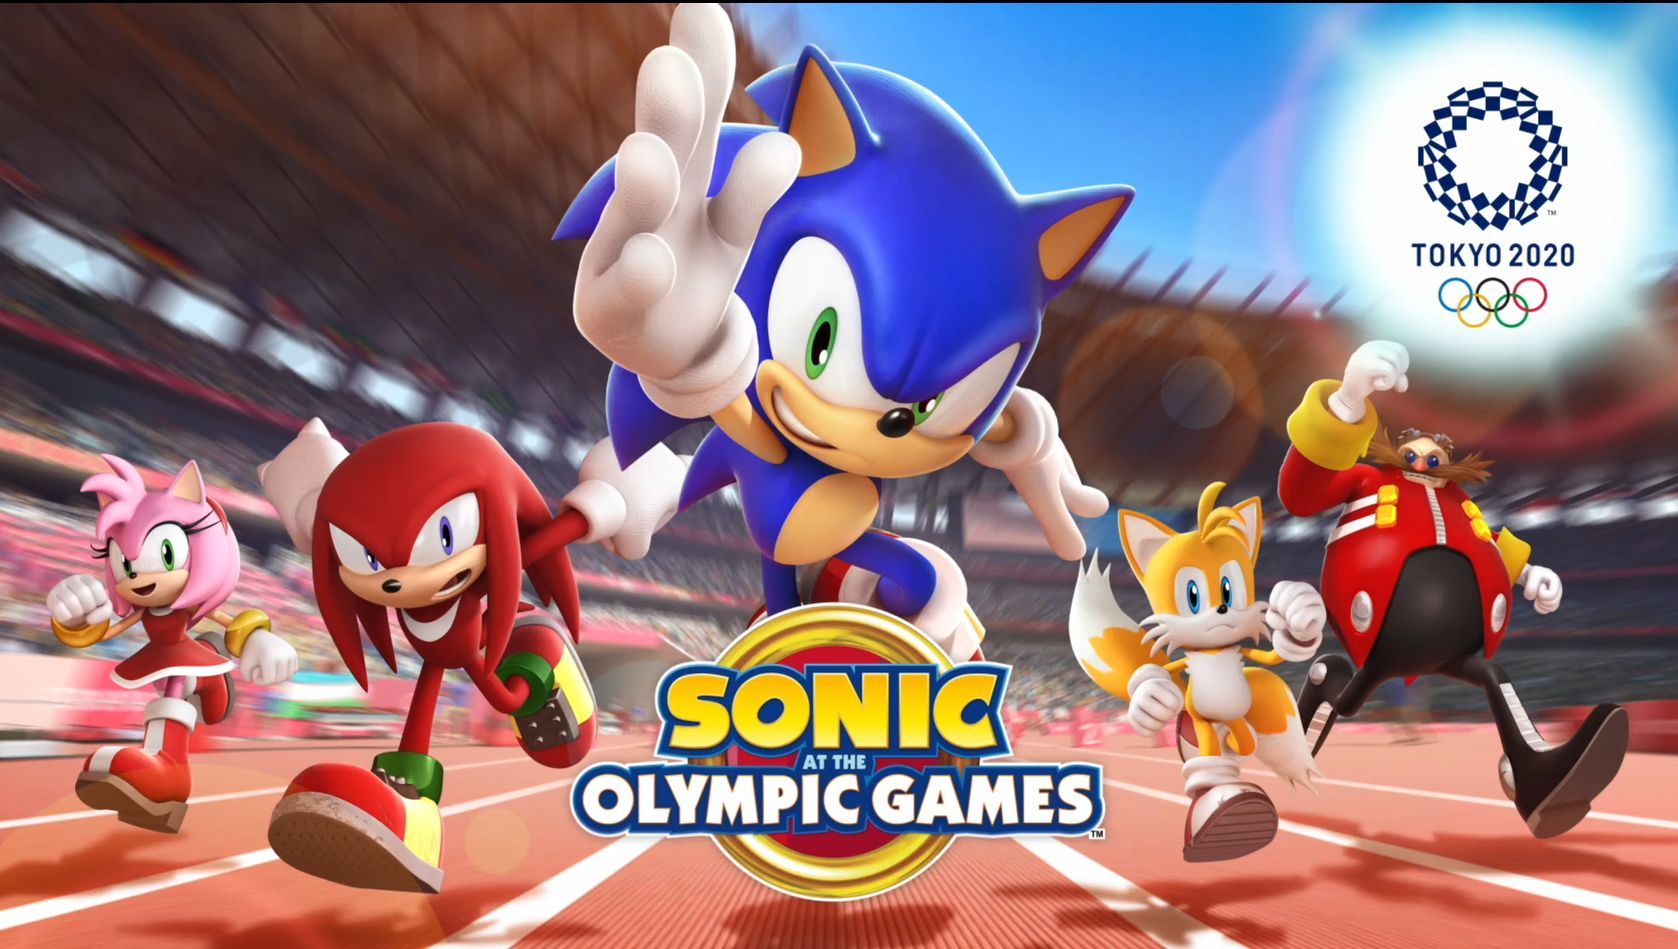 Sonic at the Olympic Games - Tokyo 2020 Available Now